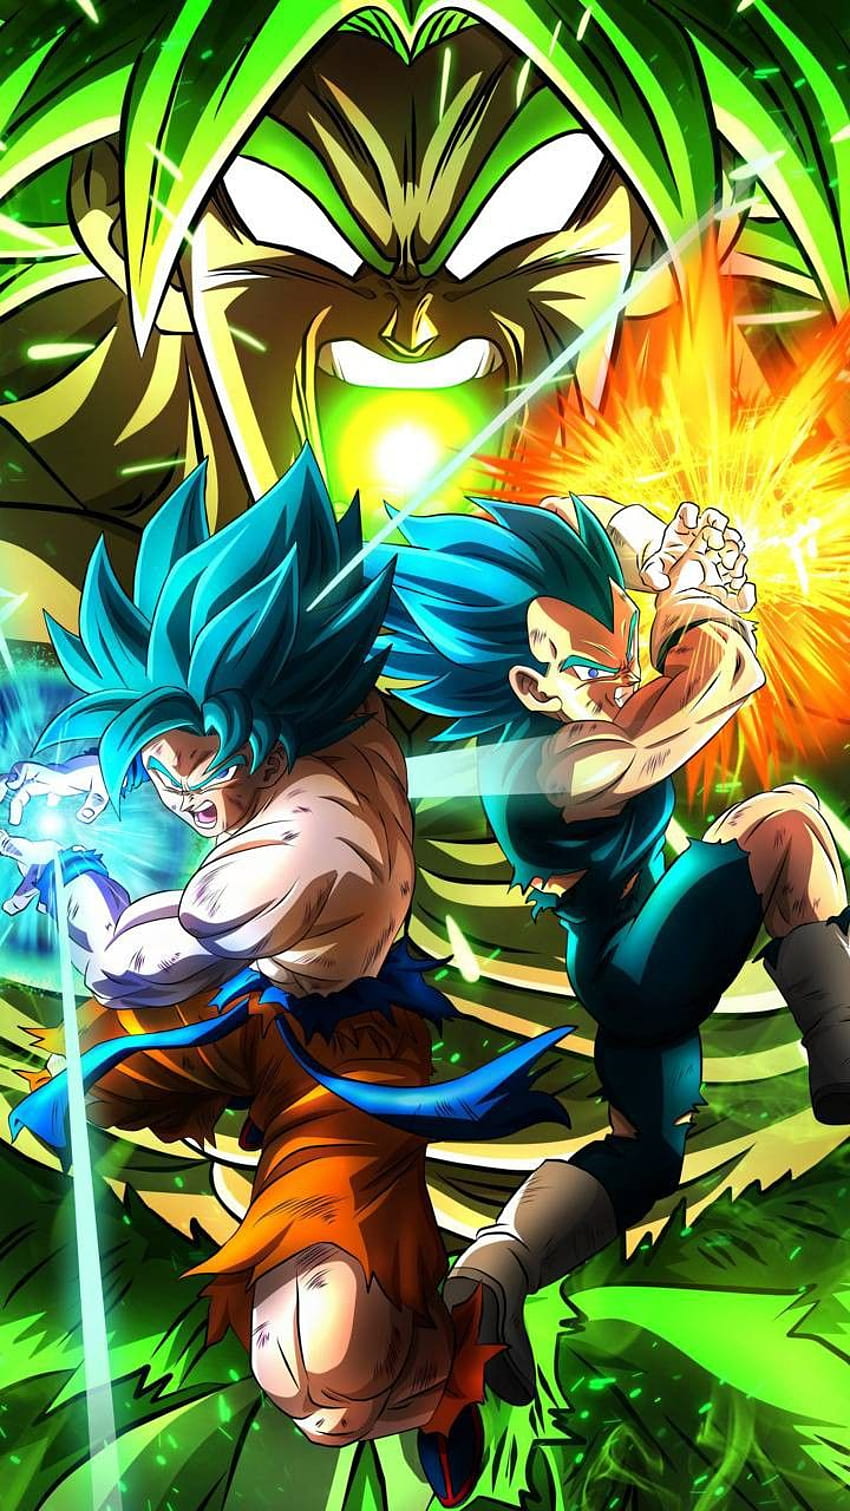 Dragon Ball Super Season 2: What to expect from the anime